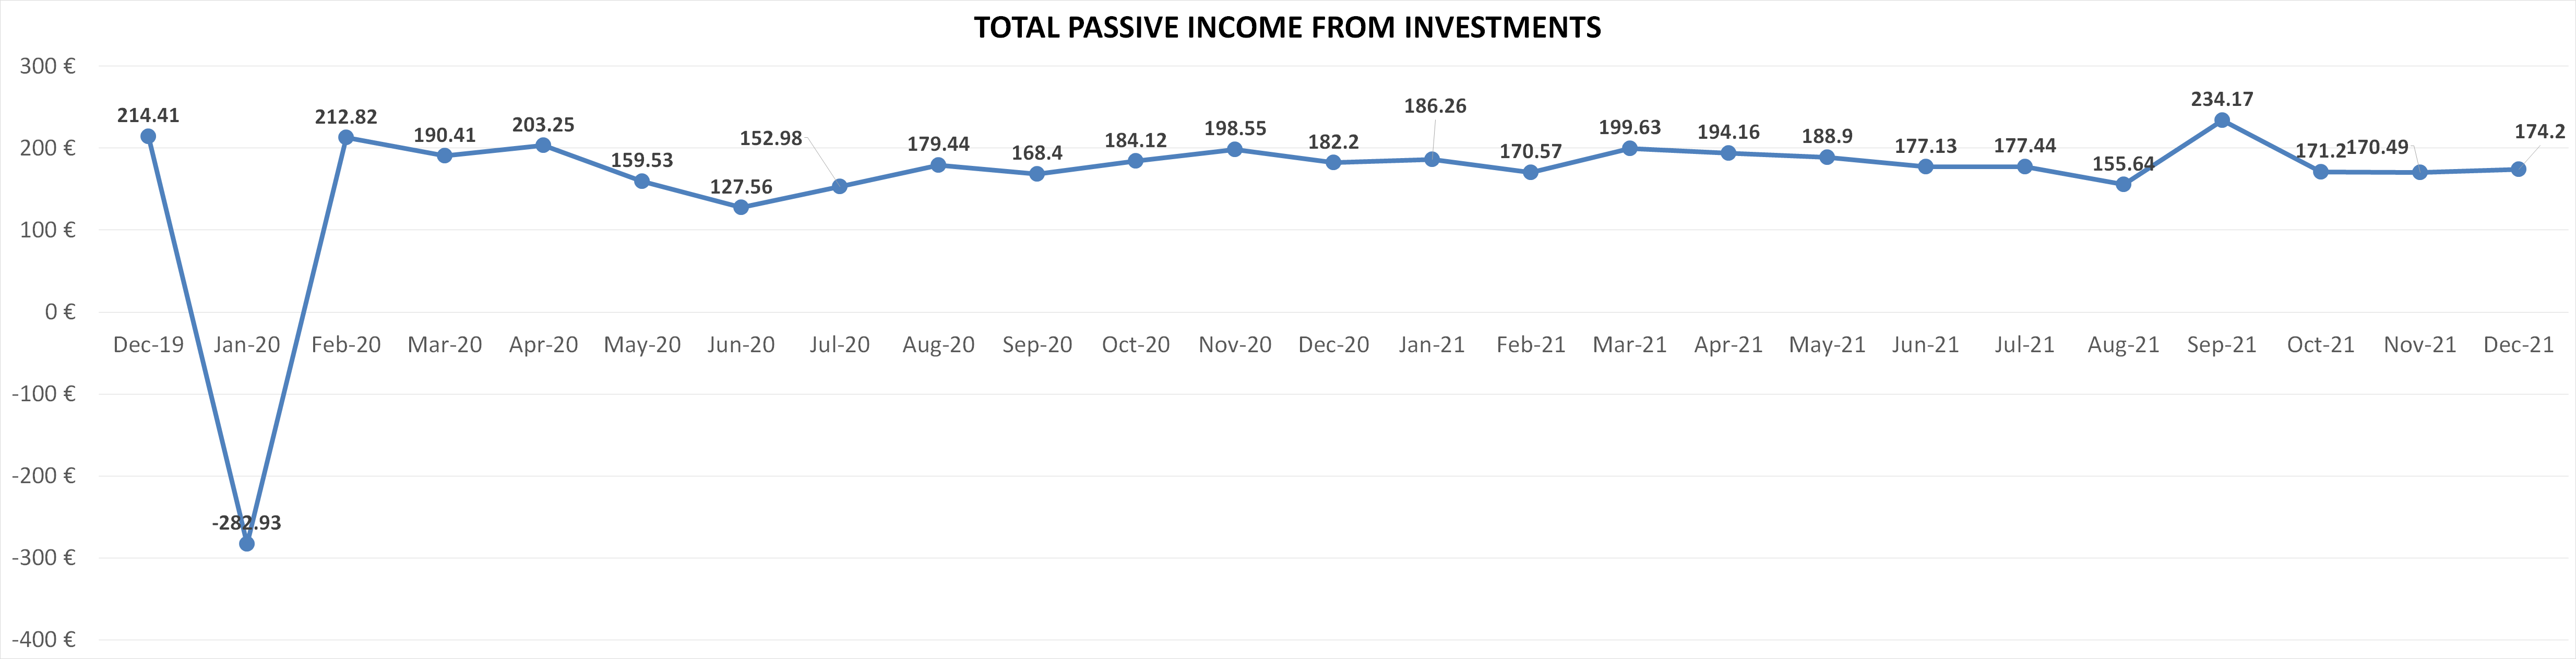 Total passive income from investments december 2021